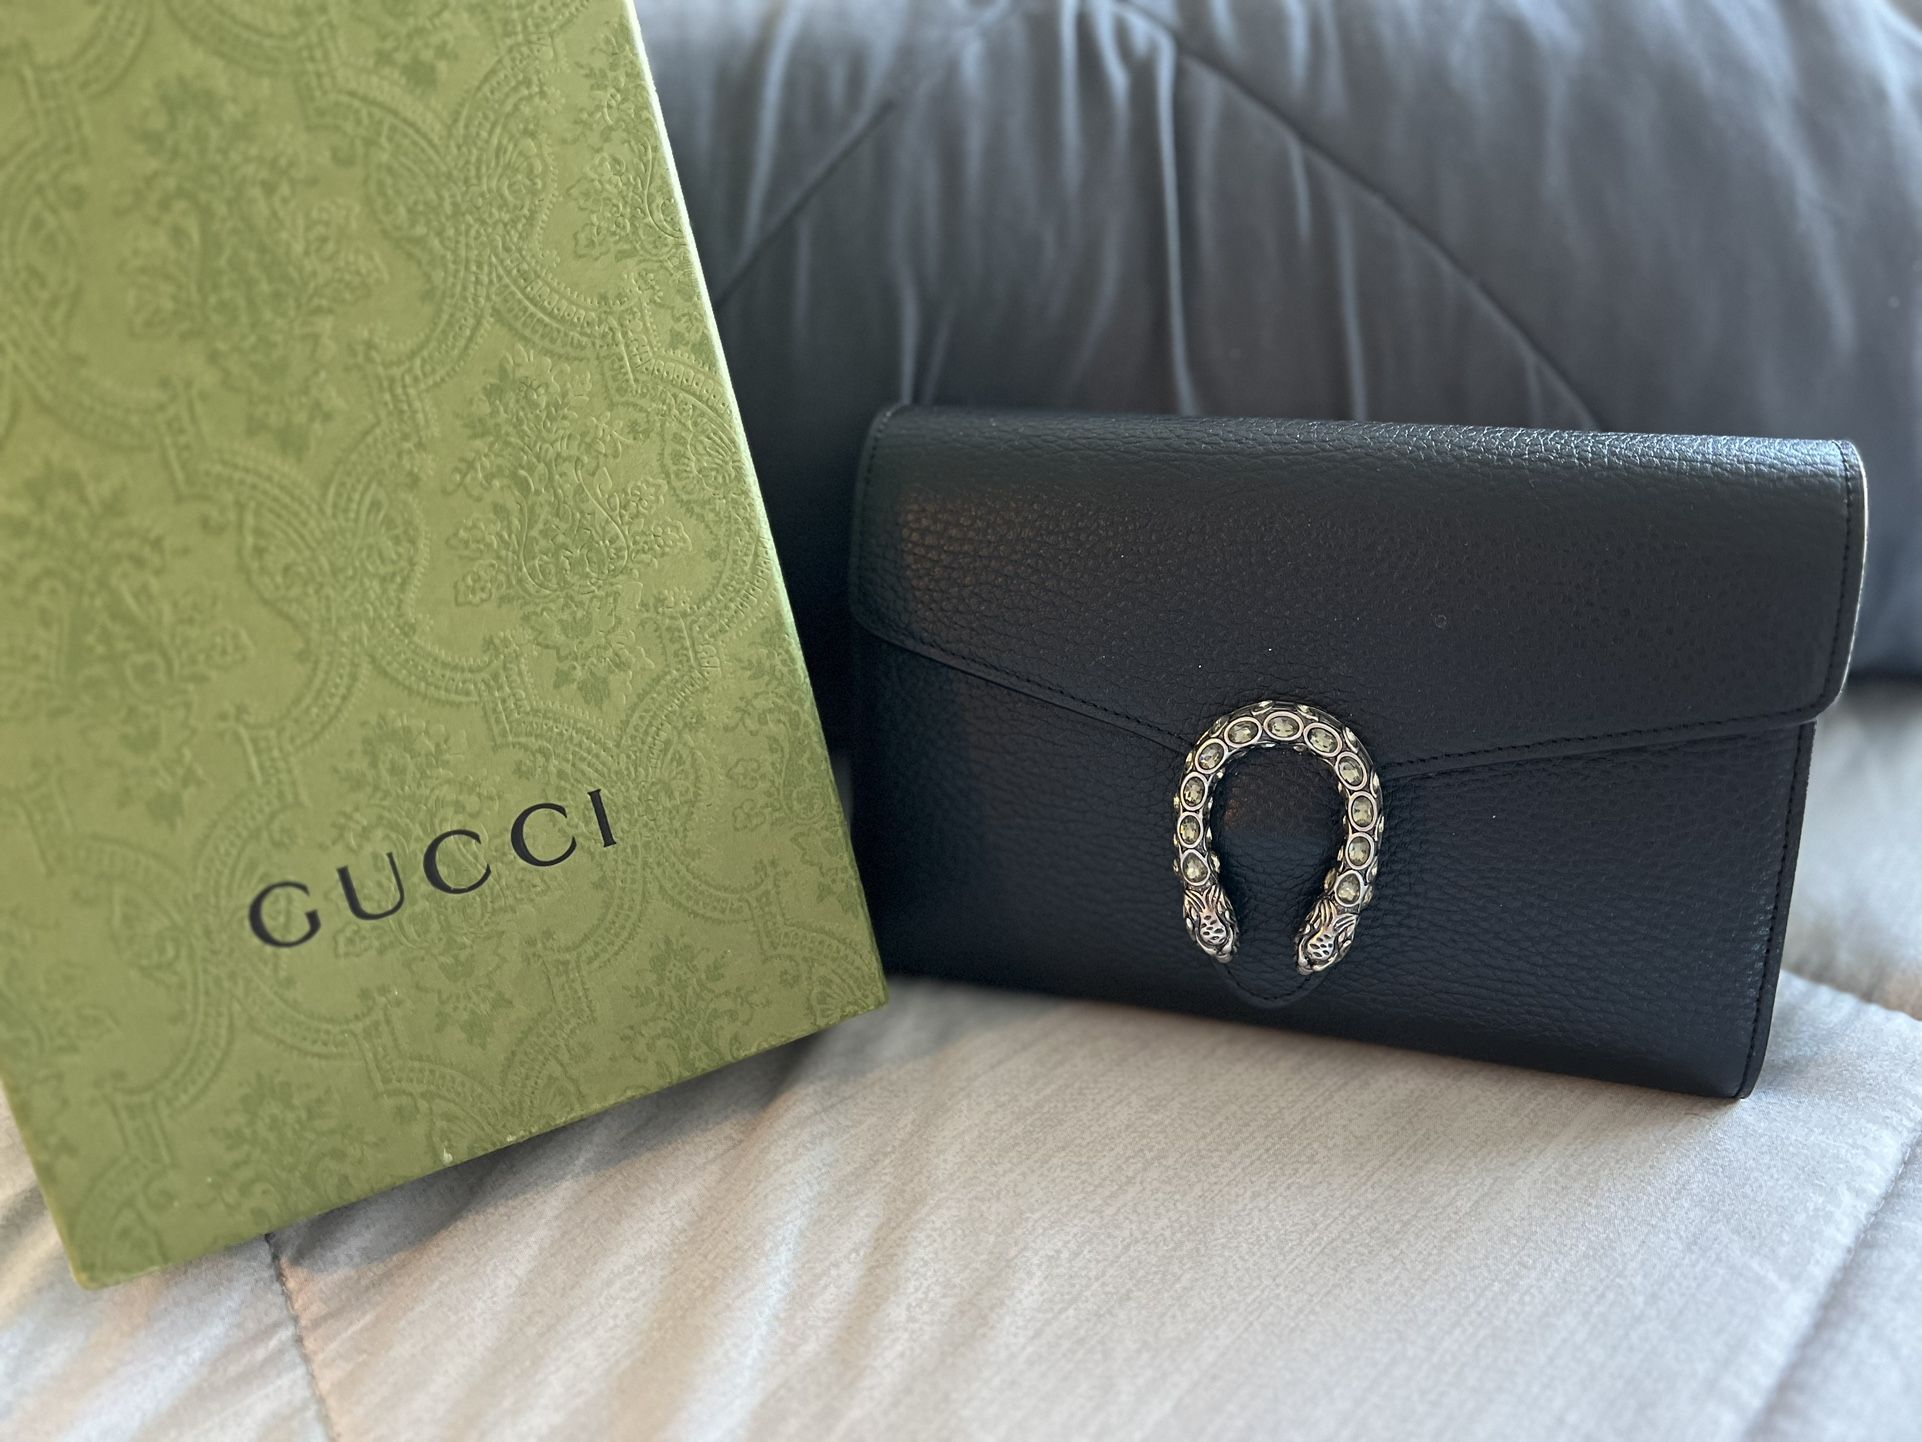 GUCCI DIONYSUS LEATHER CHAIN WALLET